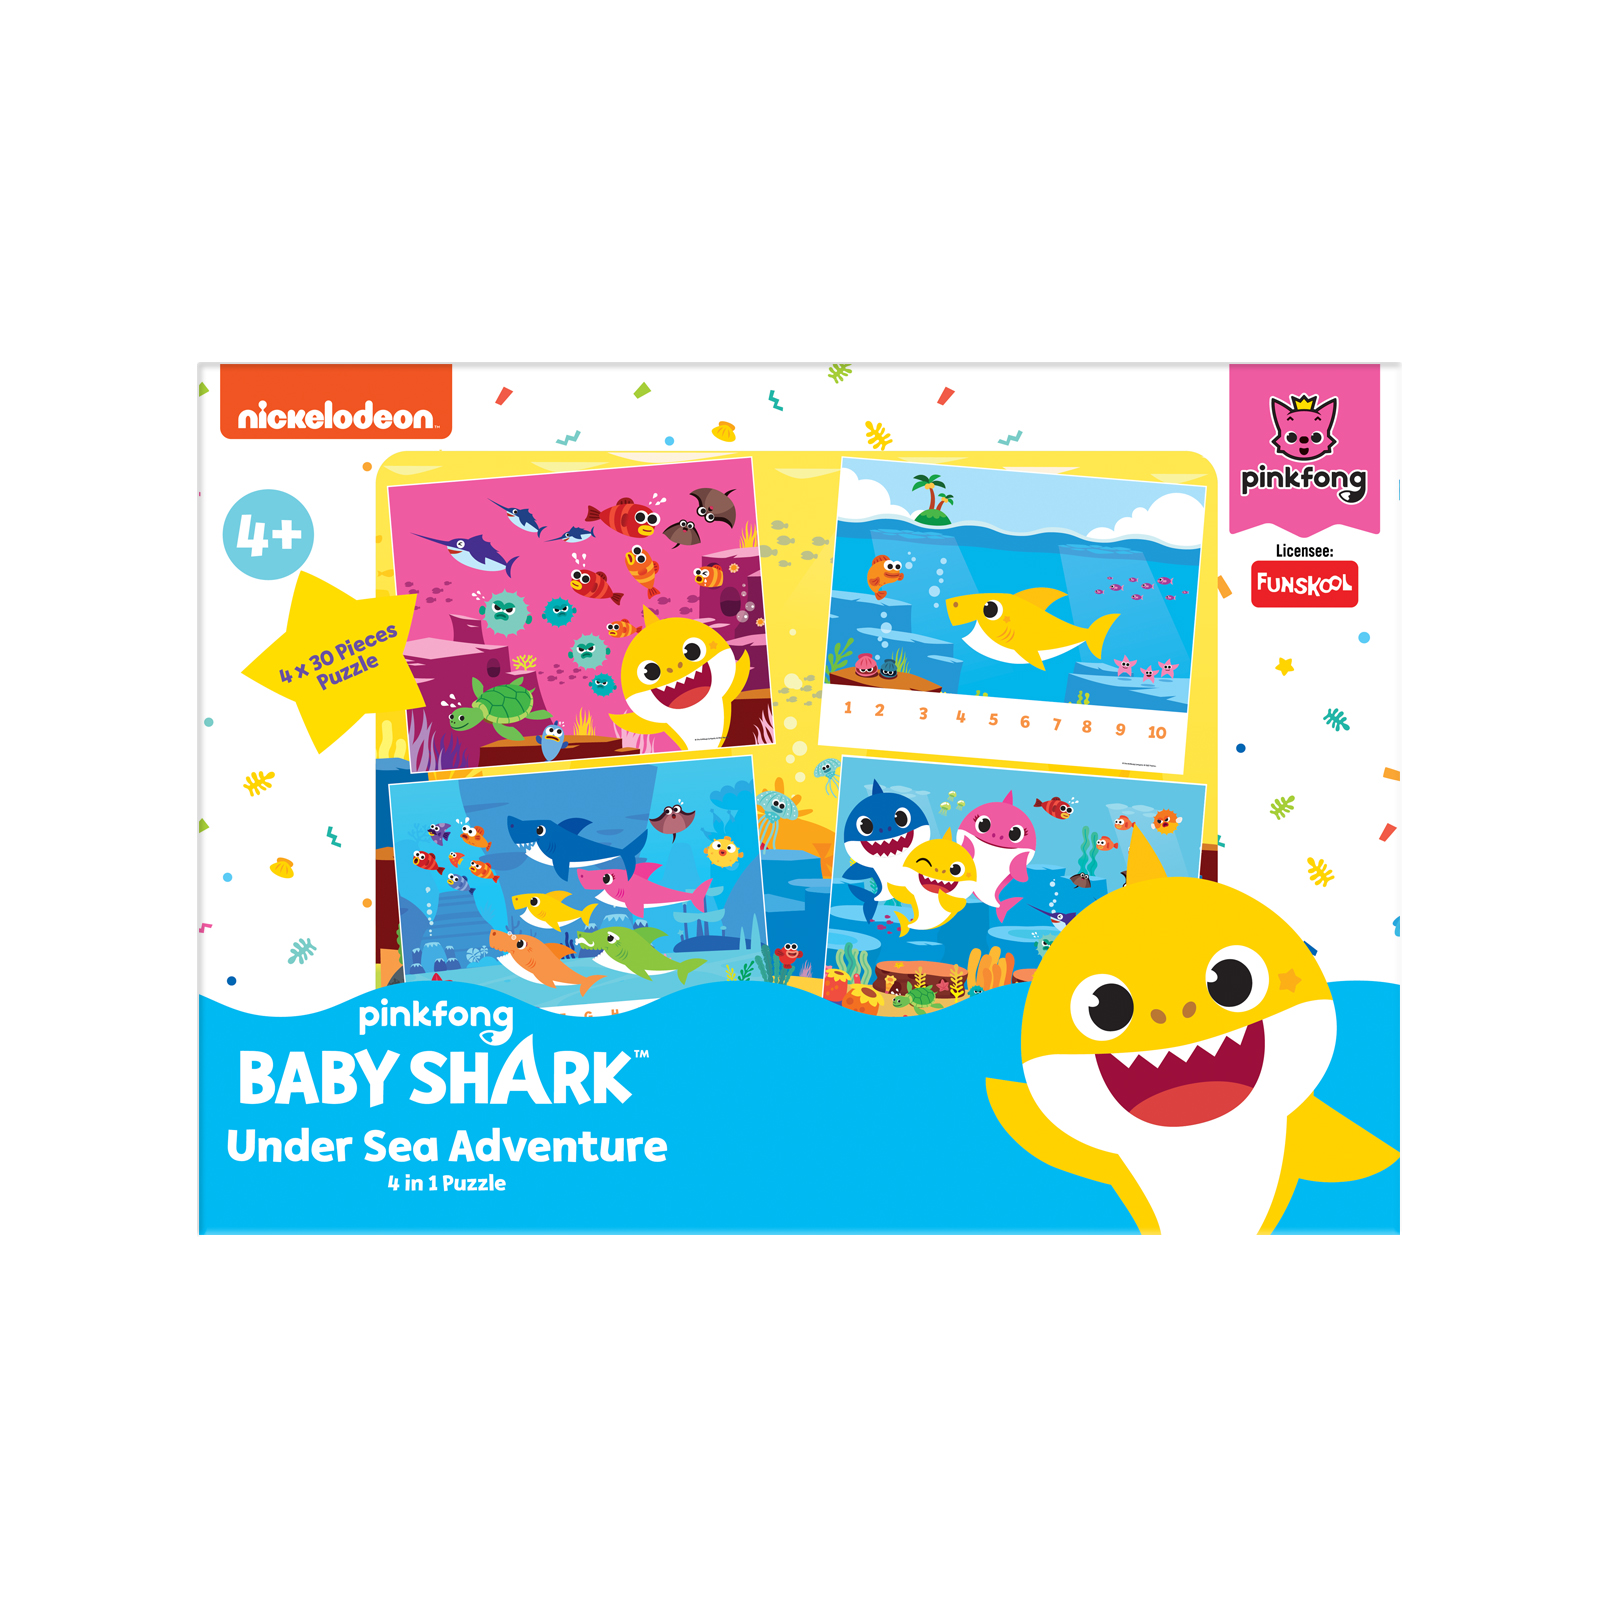 BABY SHARK 4 IN 1 PUZZLE